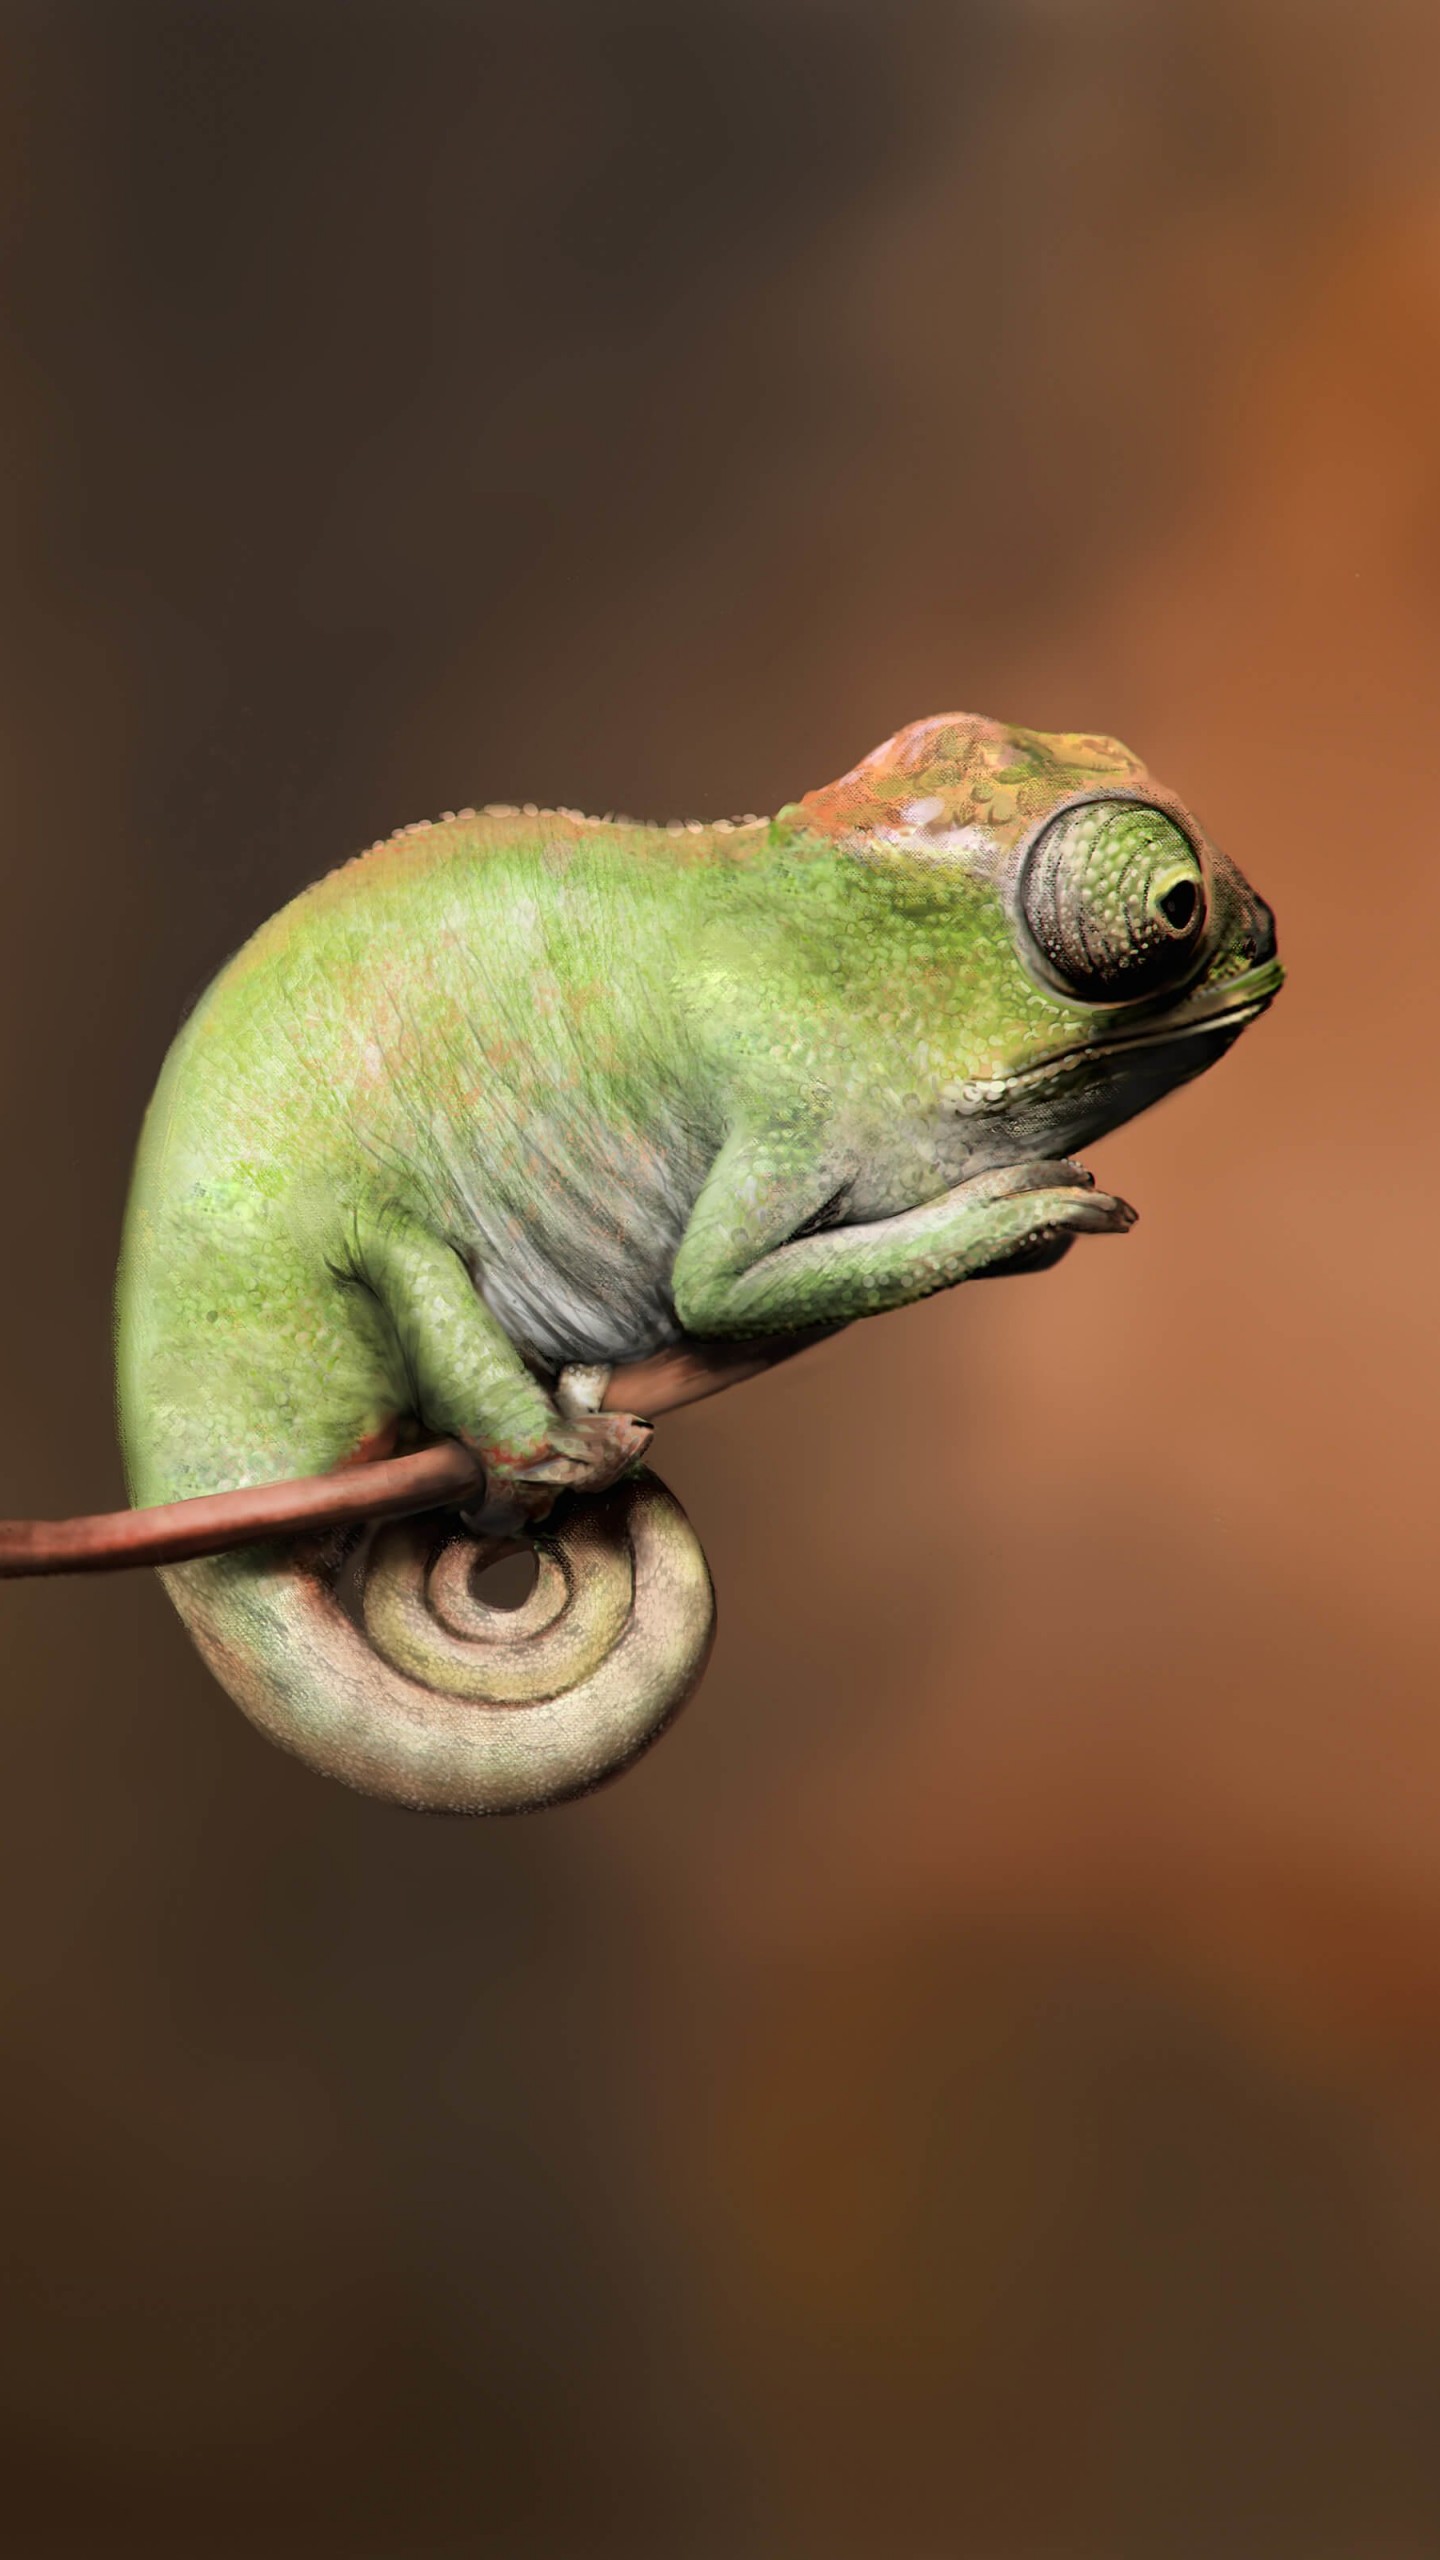 Baby Chameleon Perching On a Twisted Branch Wallpaper for SAMSUNG Galaxy S6